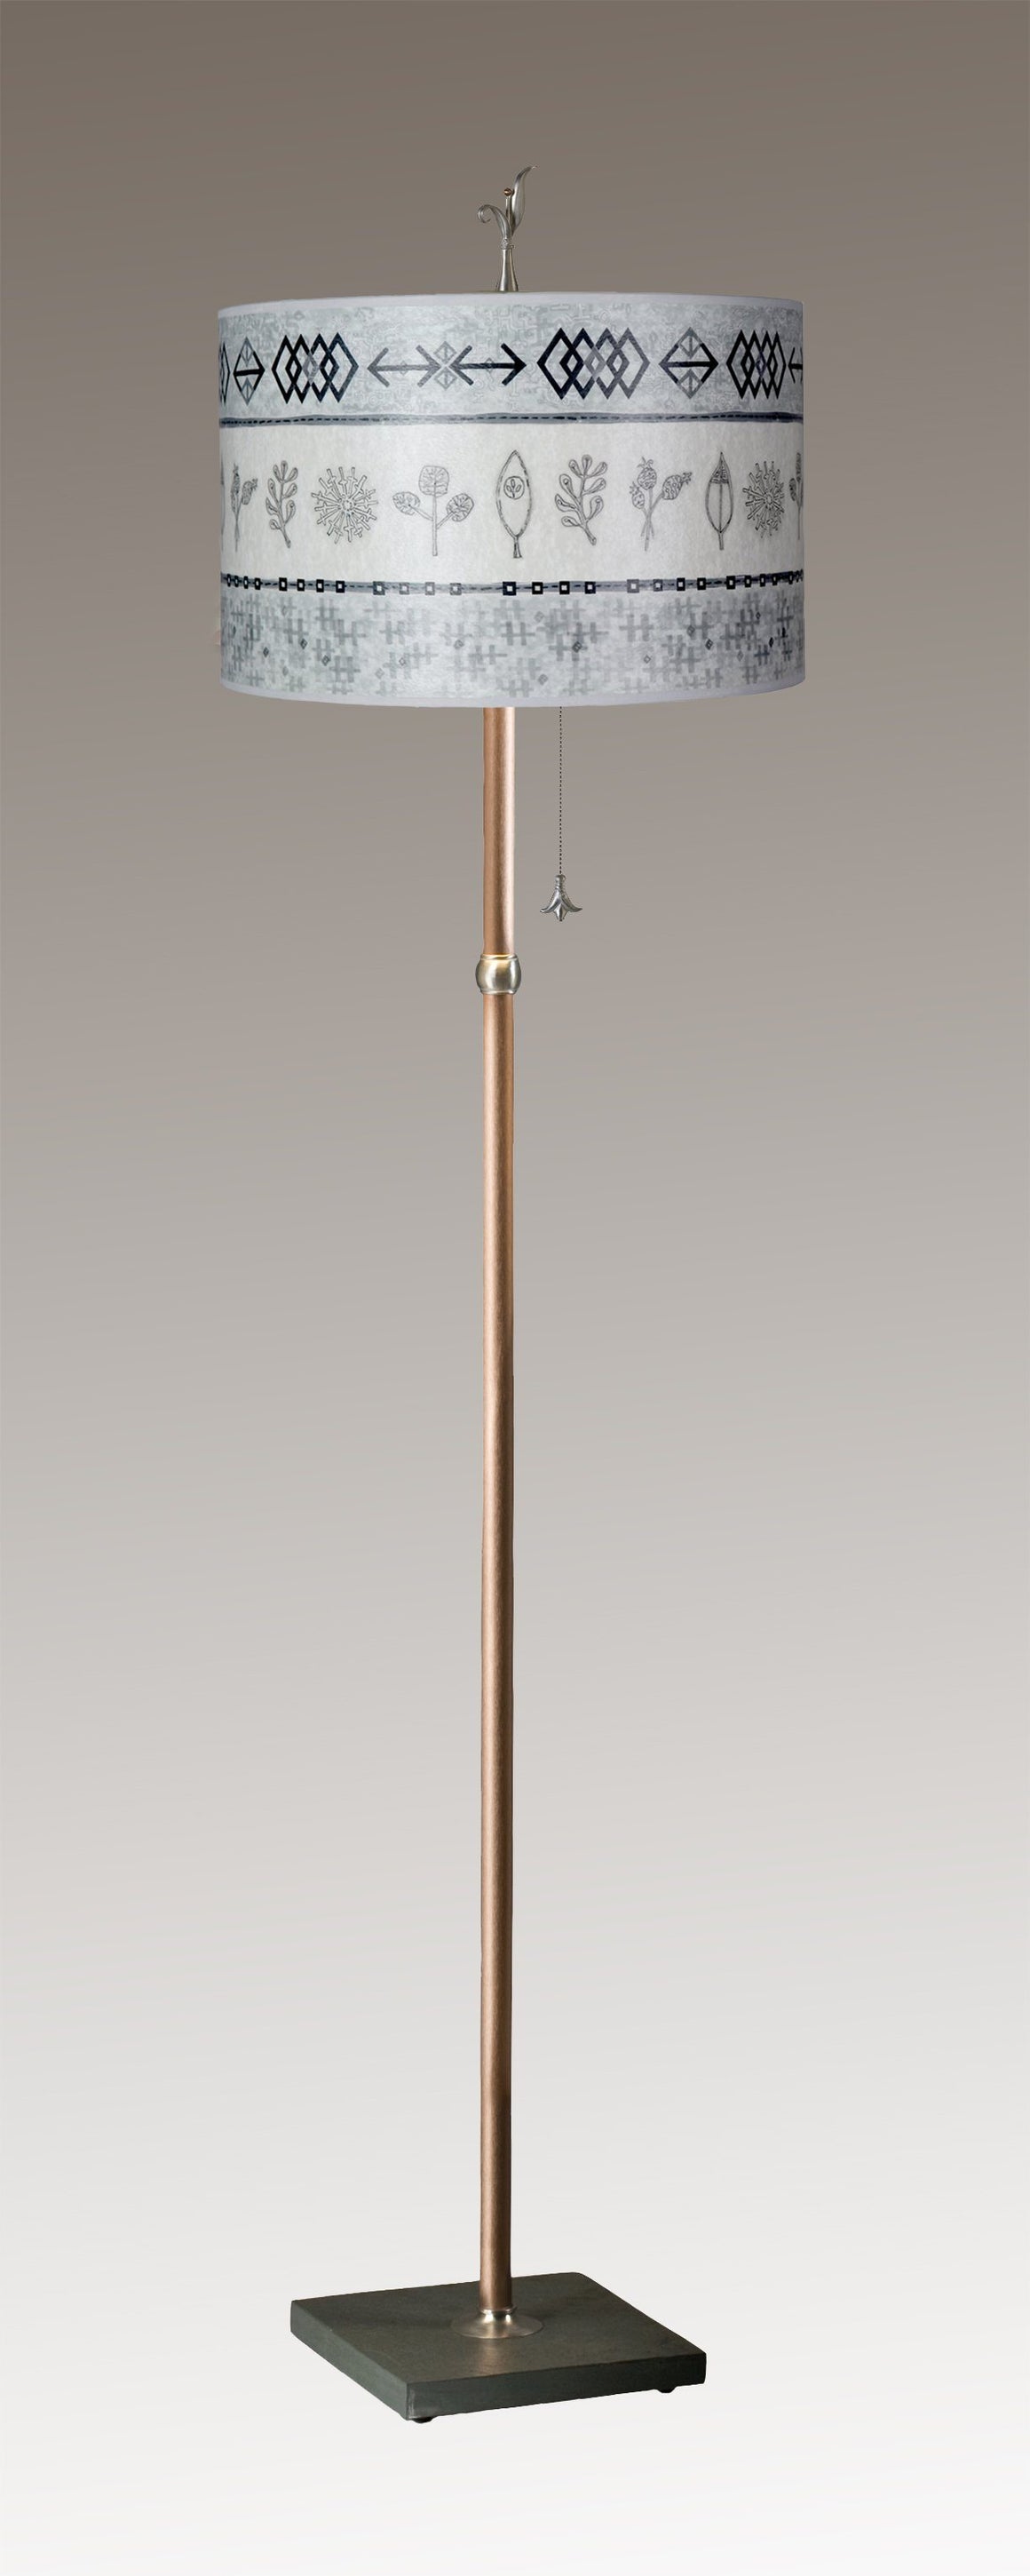 Copper Floor Lamp with Large Drum Shade in Woven & Sprig in Mist